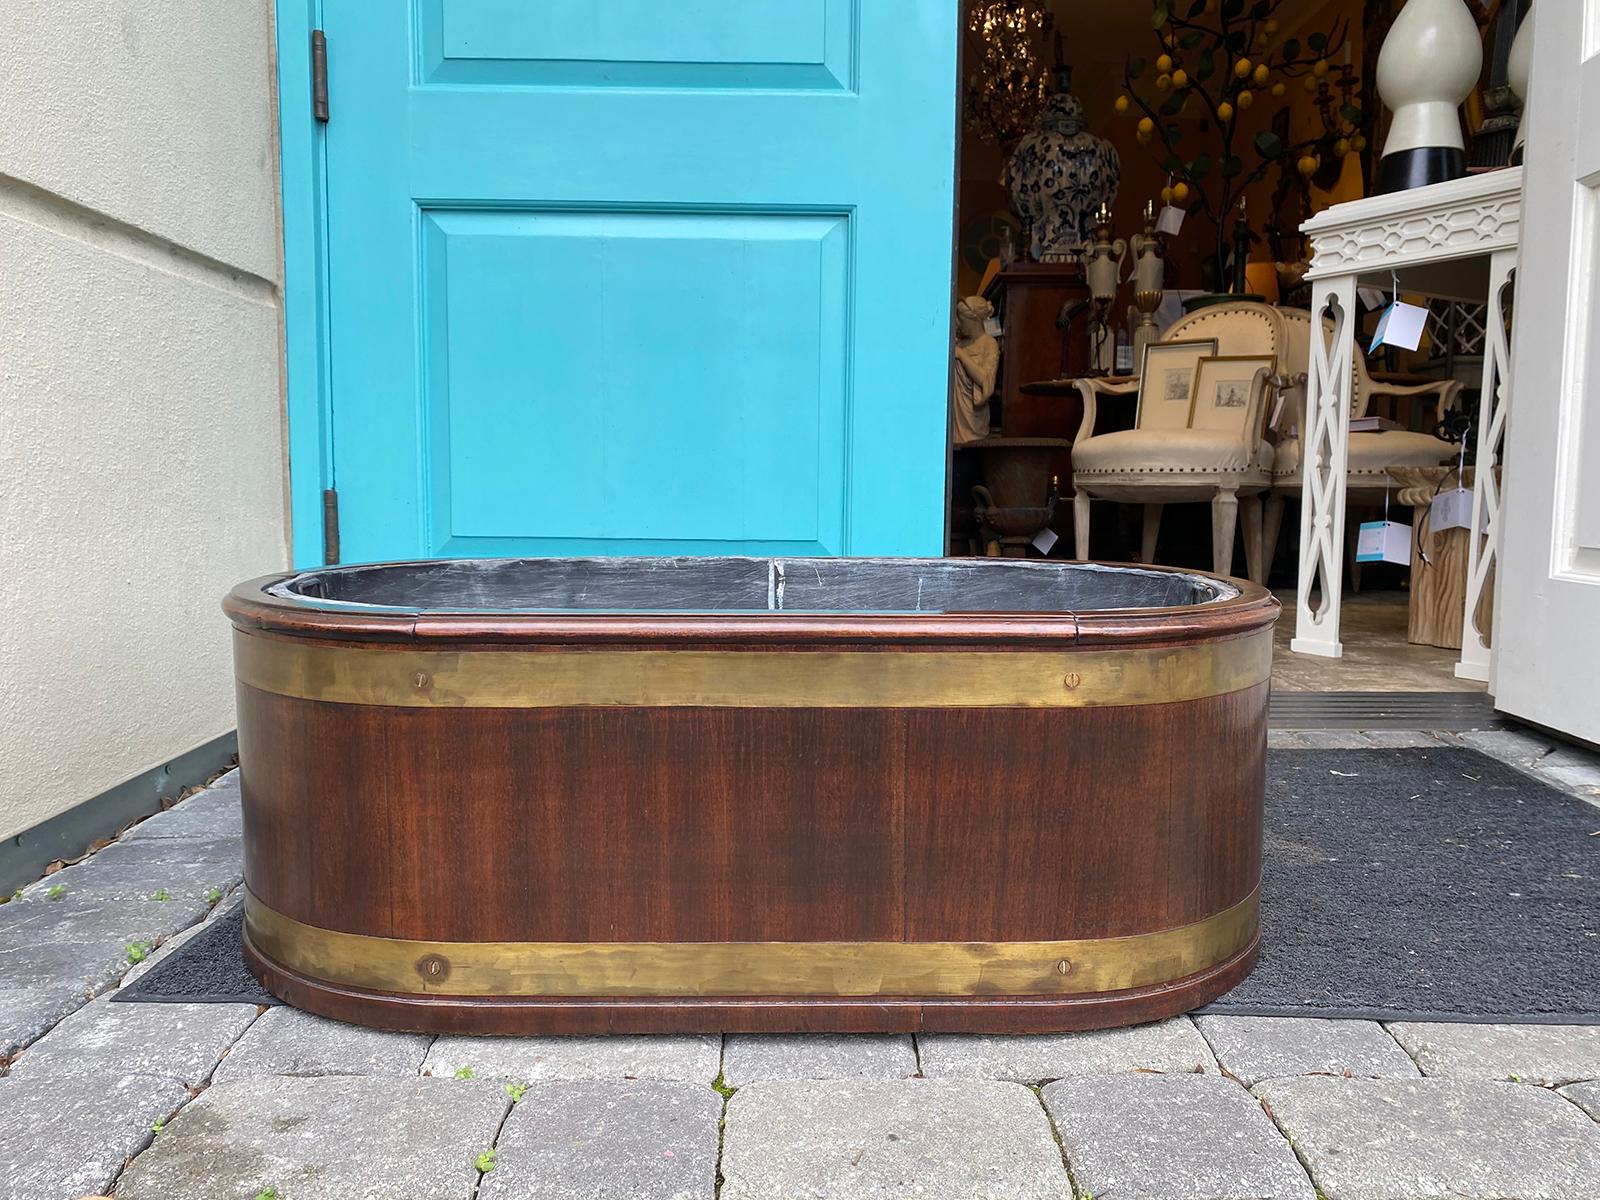 Early 20th century Georgian style brass bound mahogany wine cooler or cellarette with tole insert. Large scale.